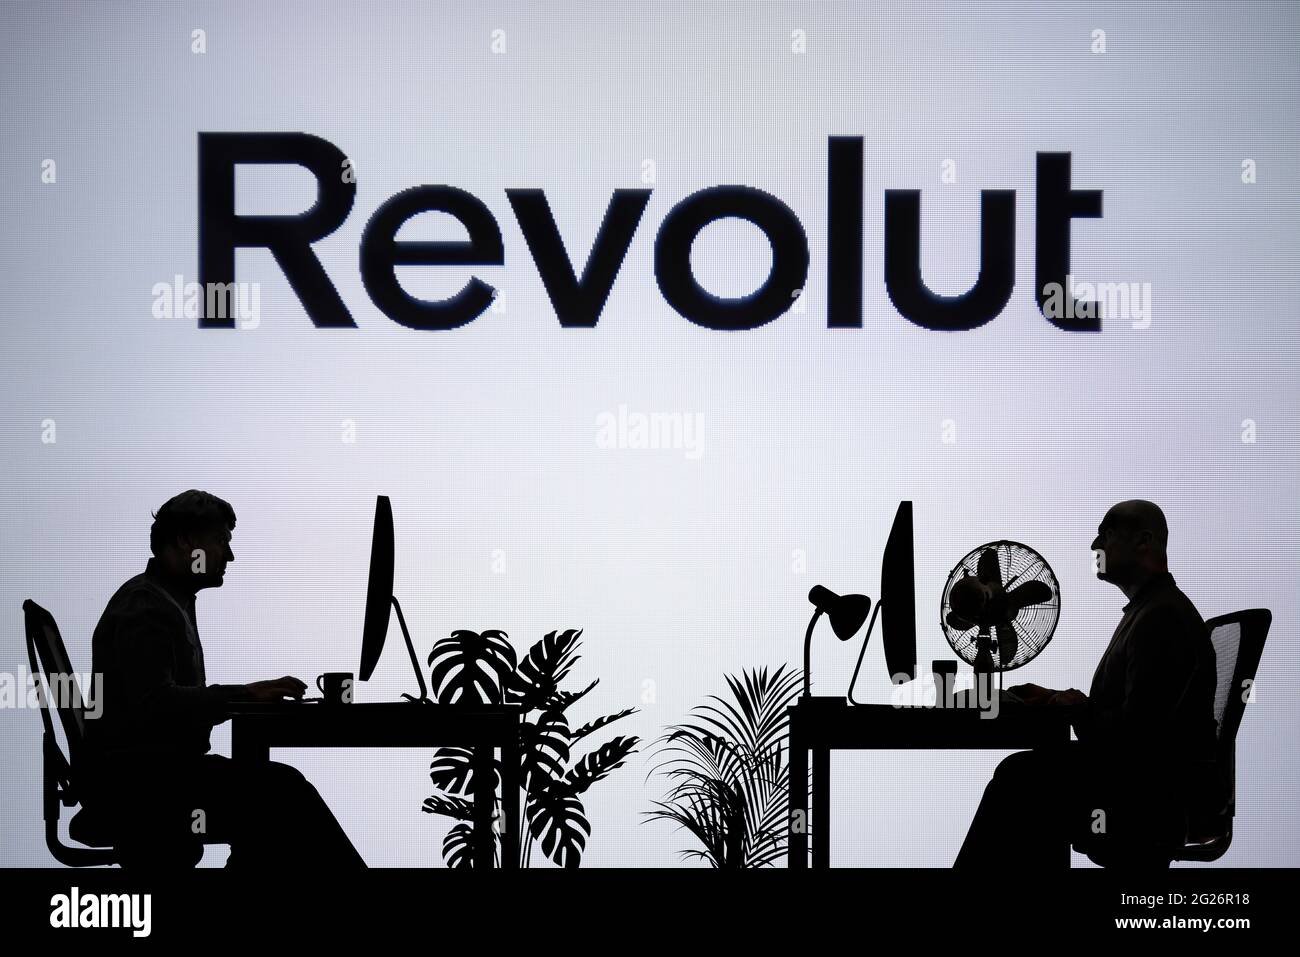 The Revolut logo is seen on an LED screen in the background while two silhouetted people work in an office environment (Editorial use only) Stock Photo